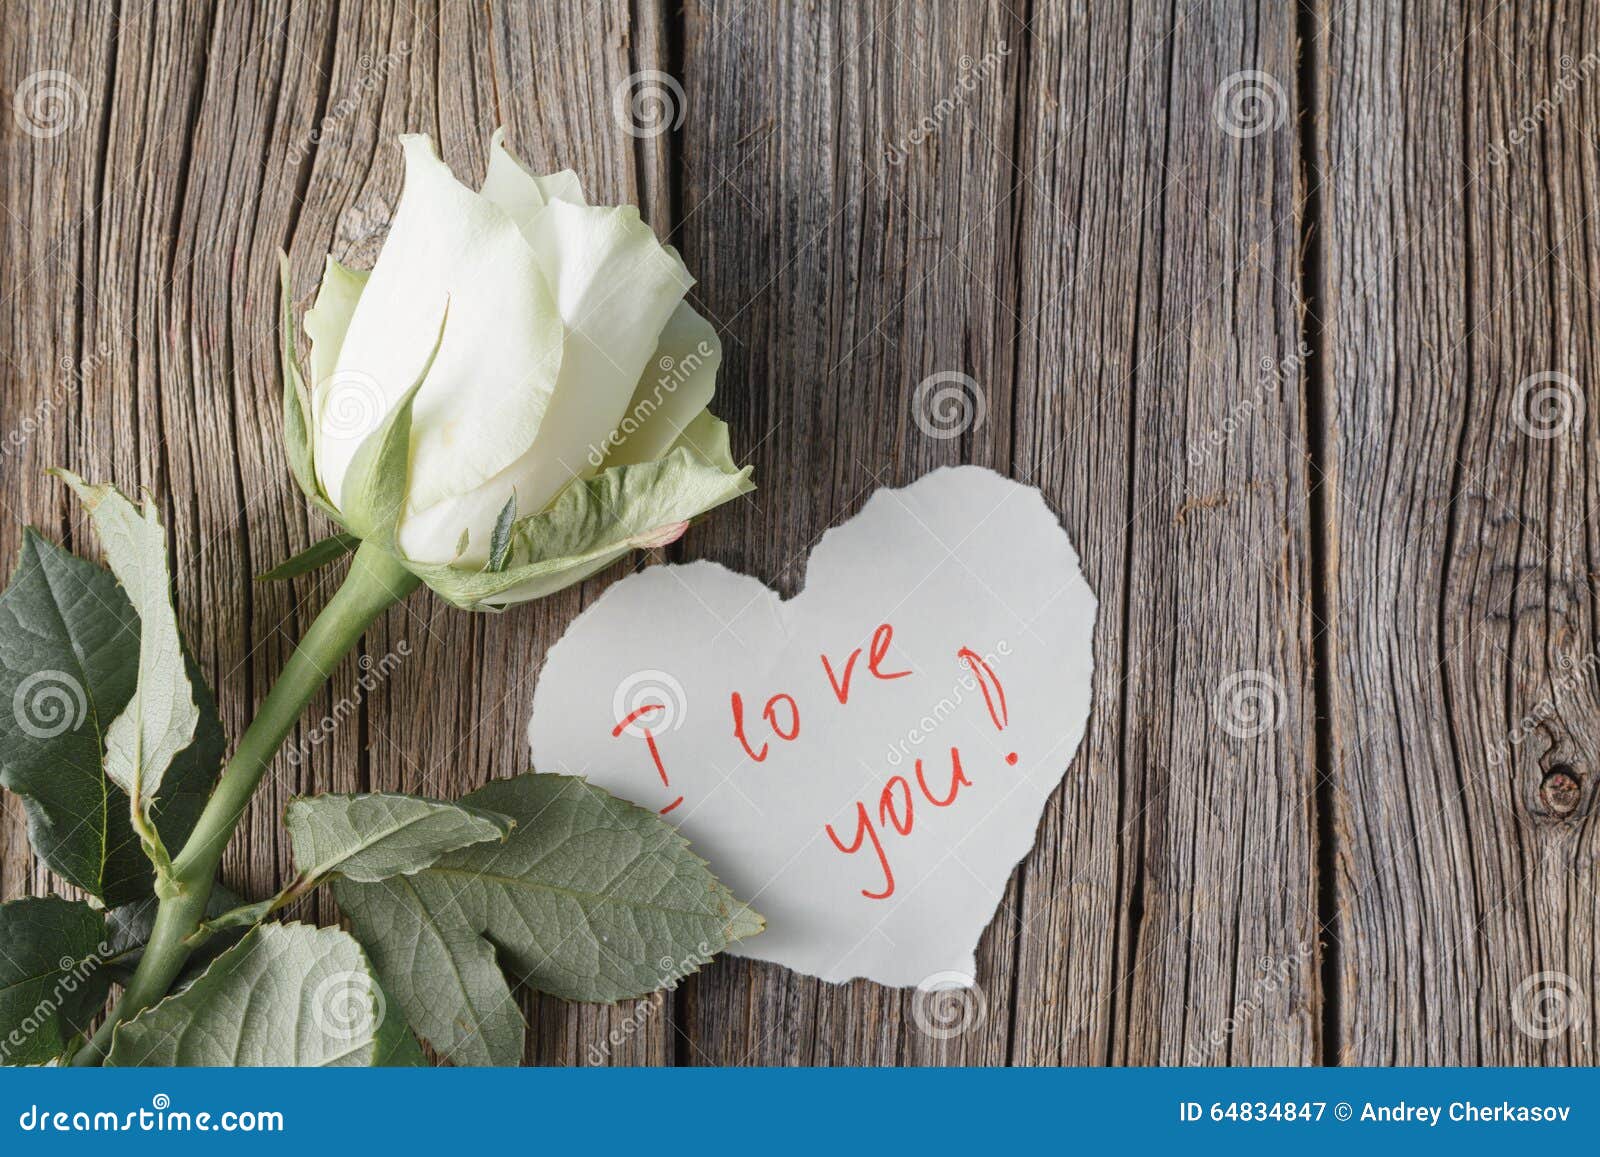 White Rose with Love Message Stock Image - Image of message ...